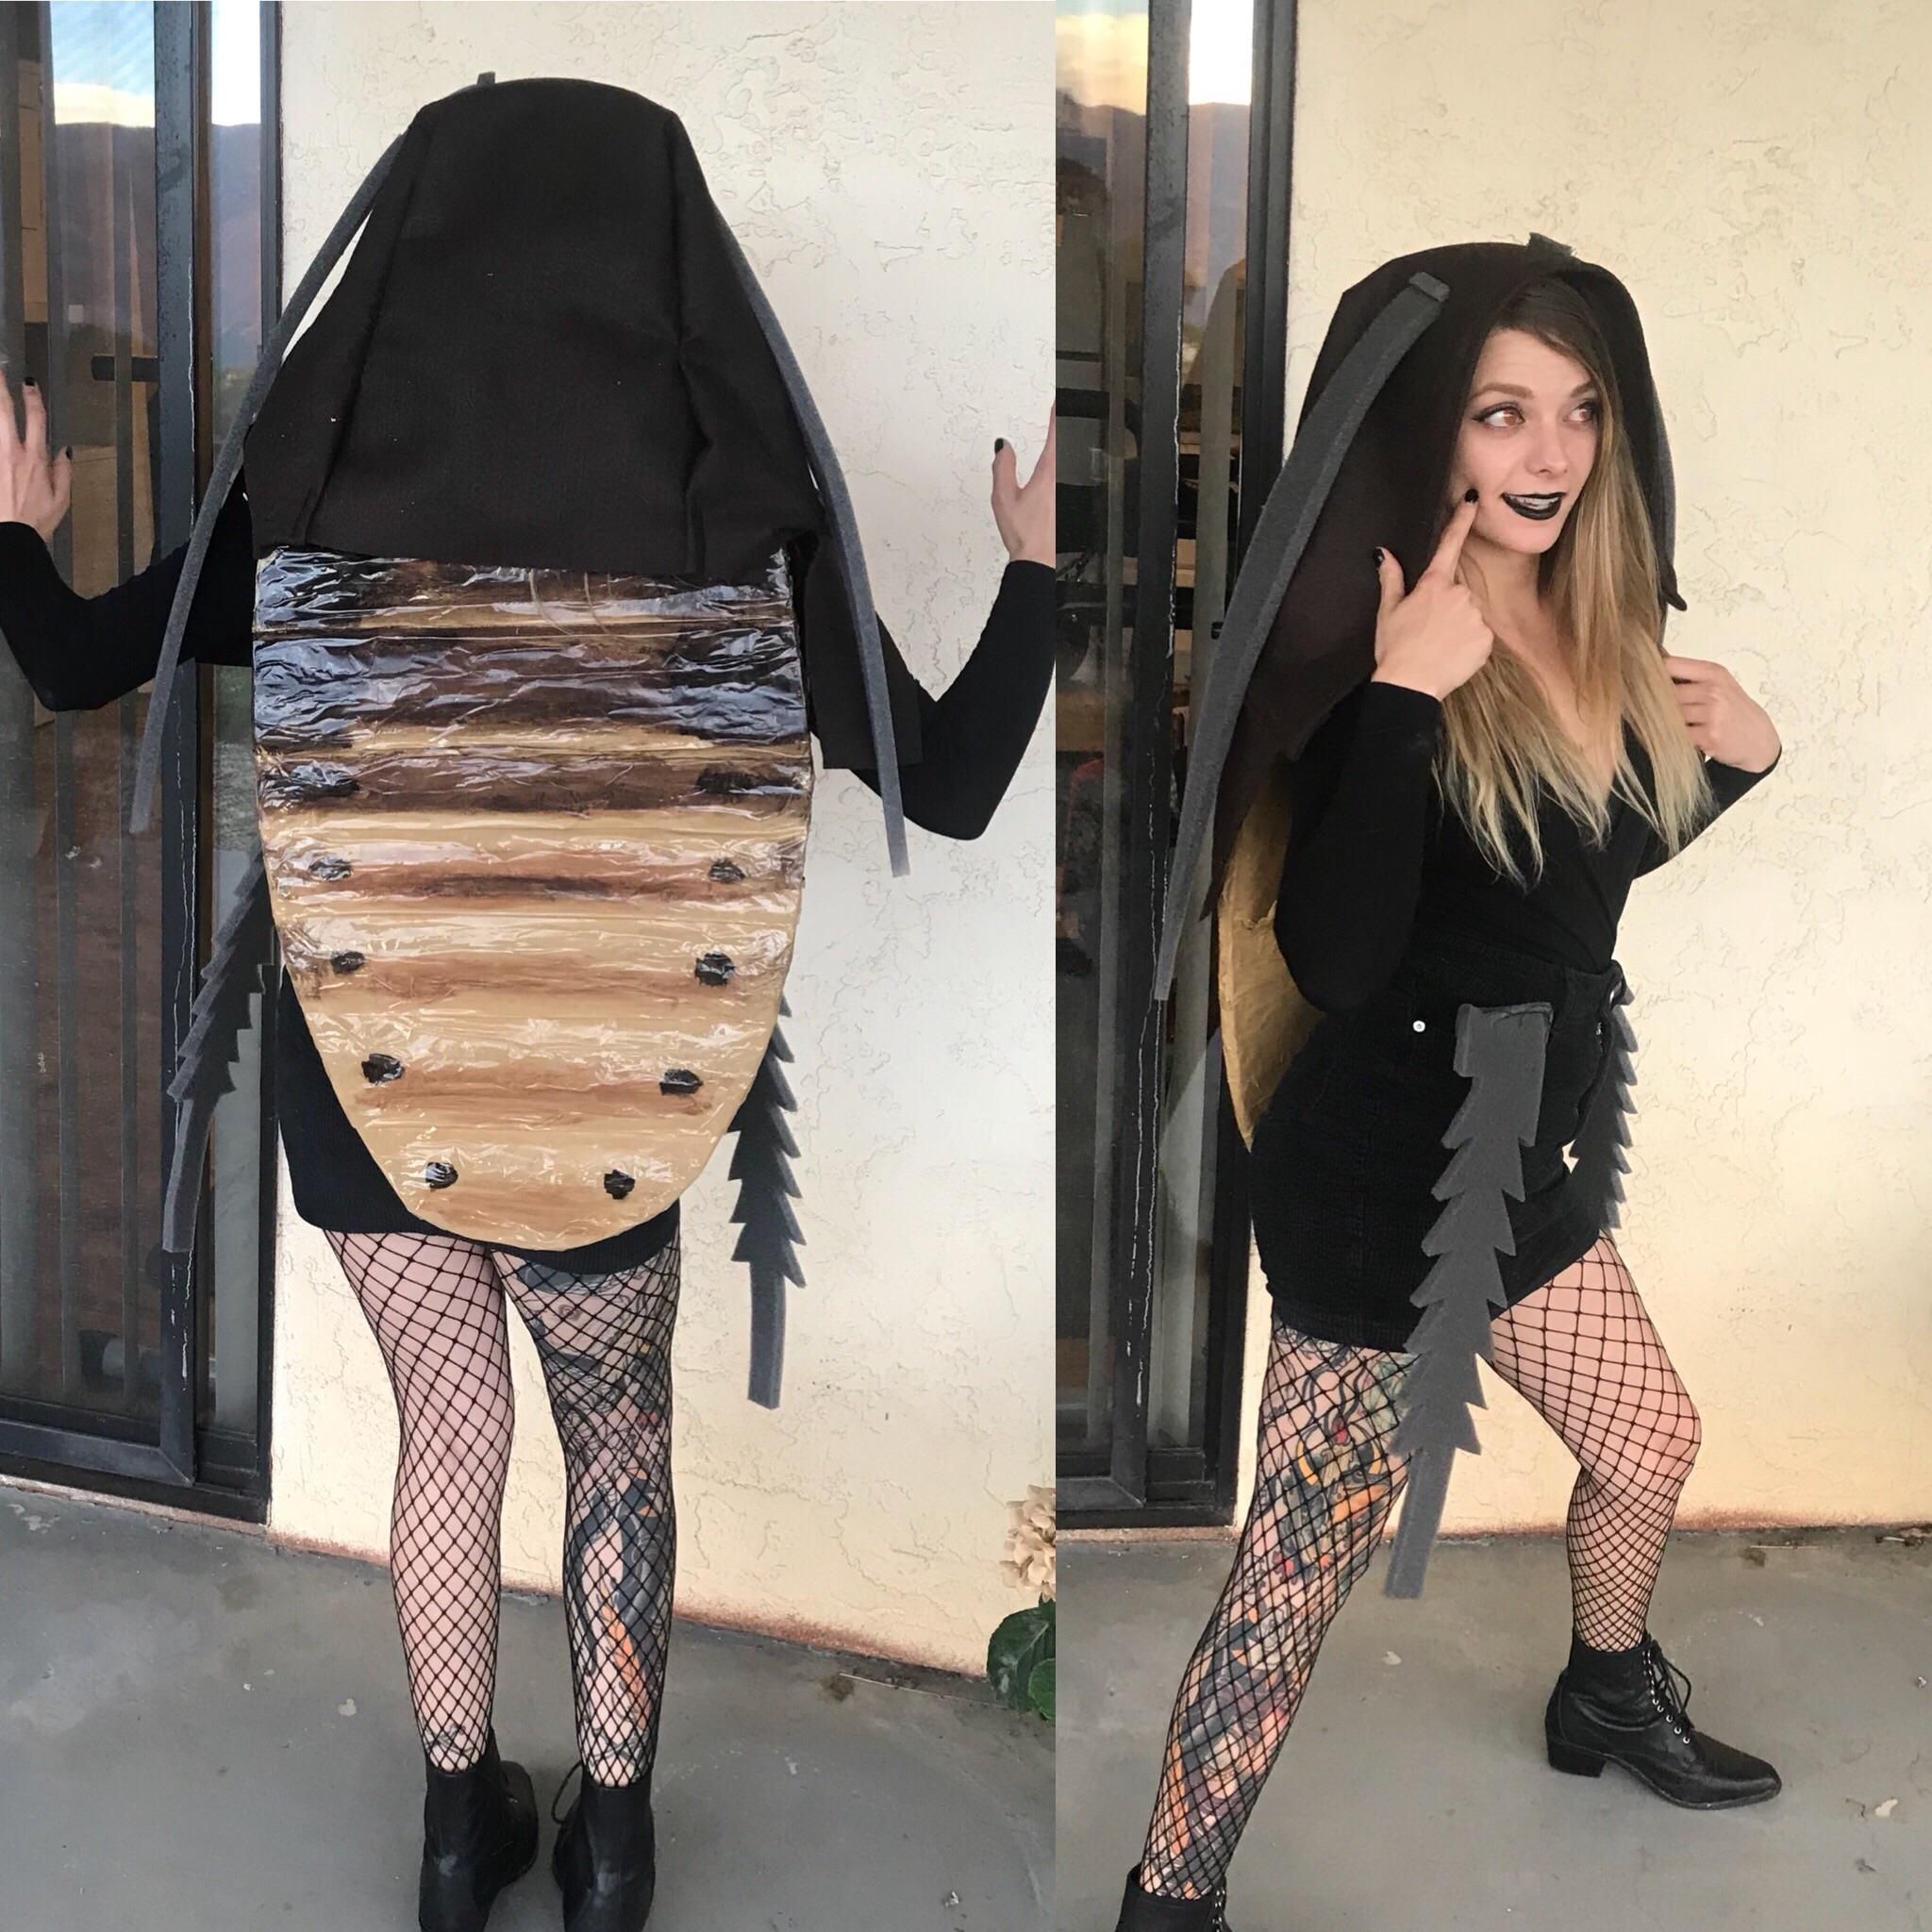 Just your classic sexy ***roach